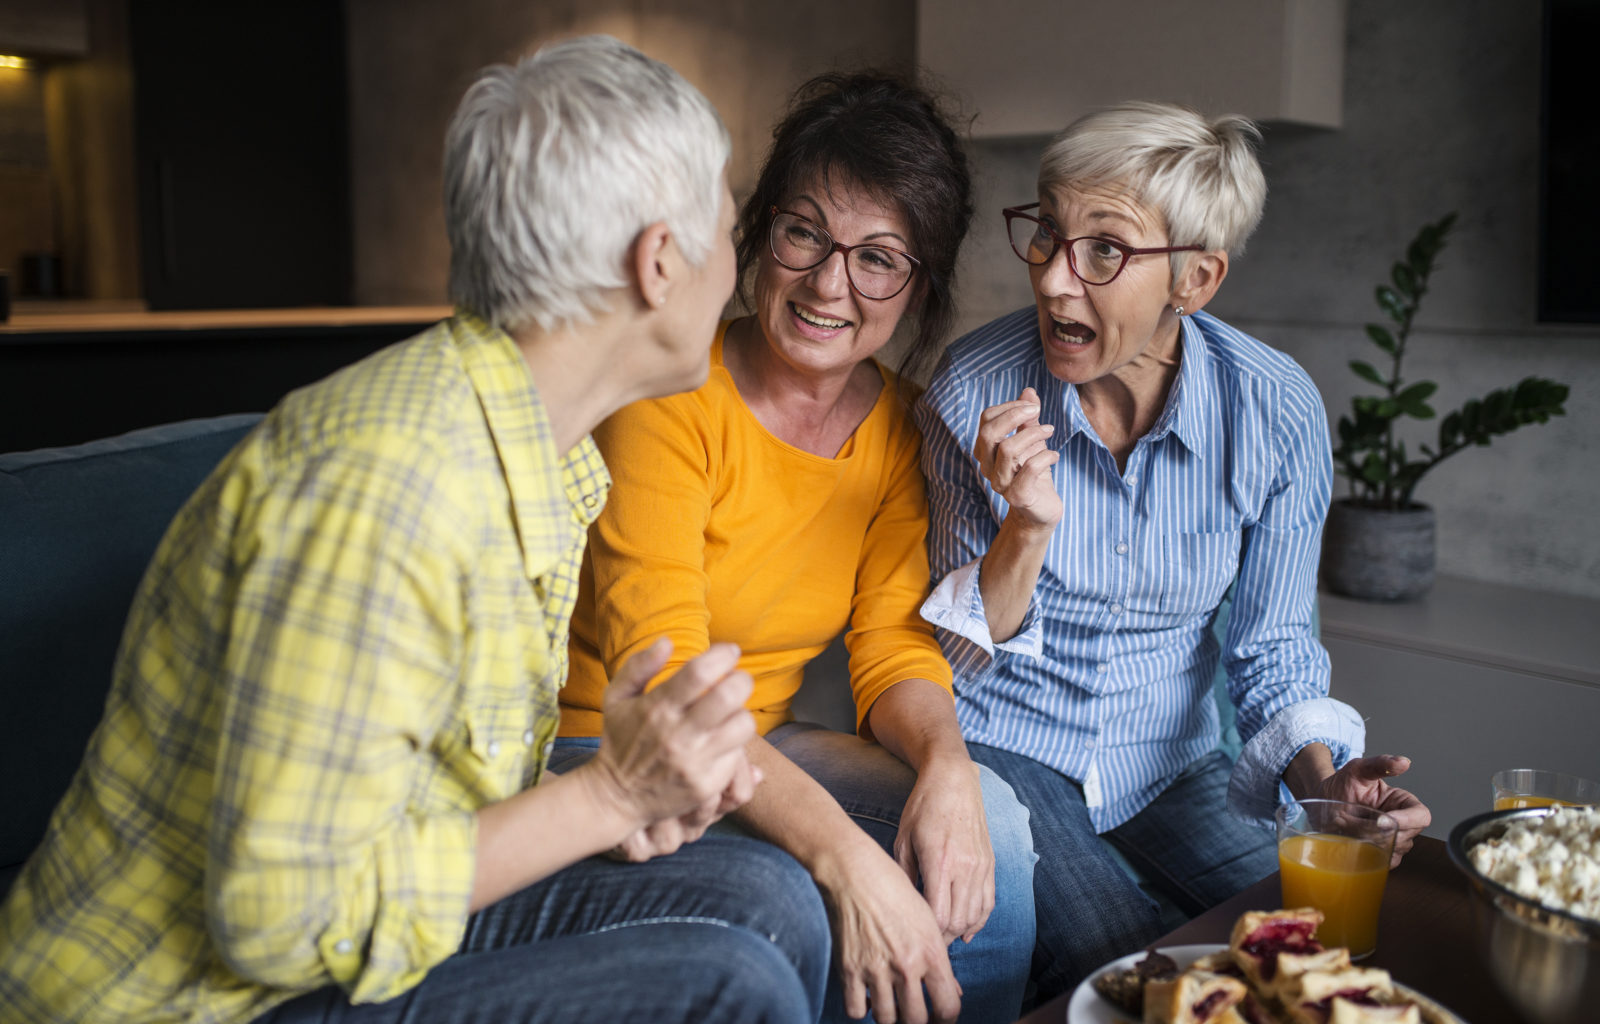 Three older women sitting on a couch, laughing, and enjoying each other's company.